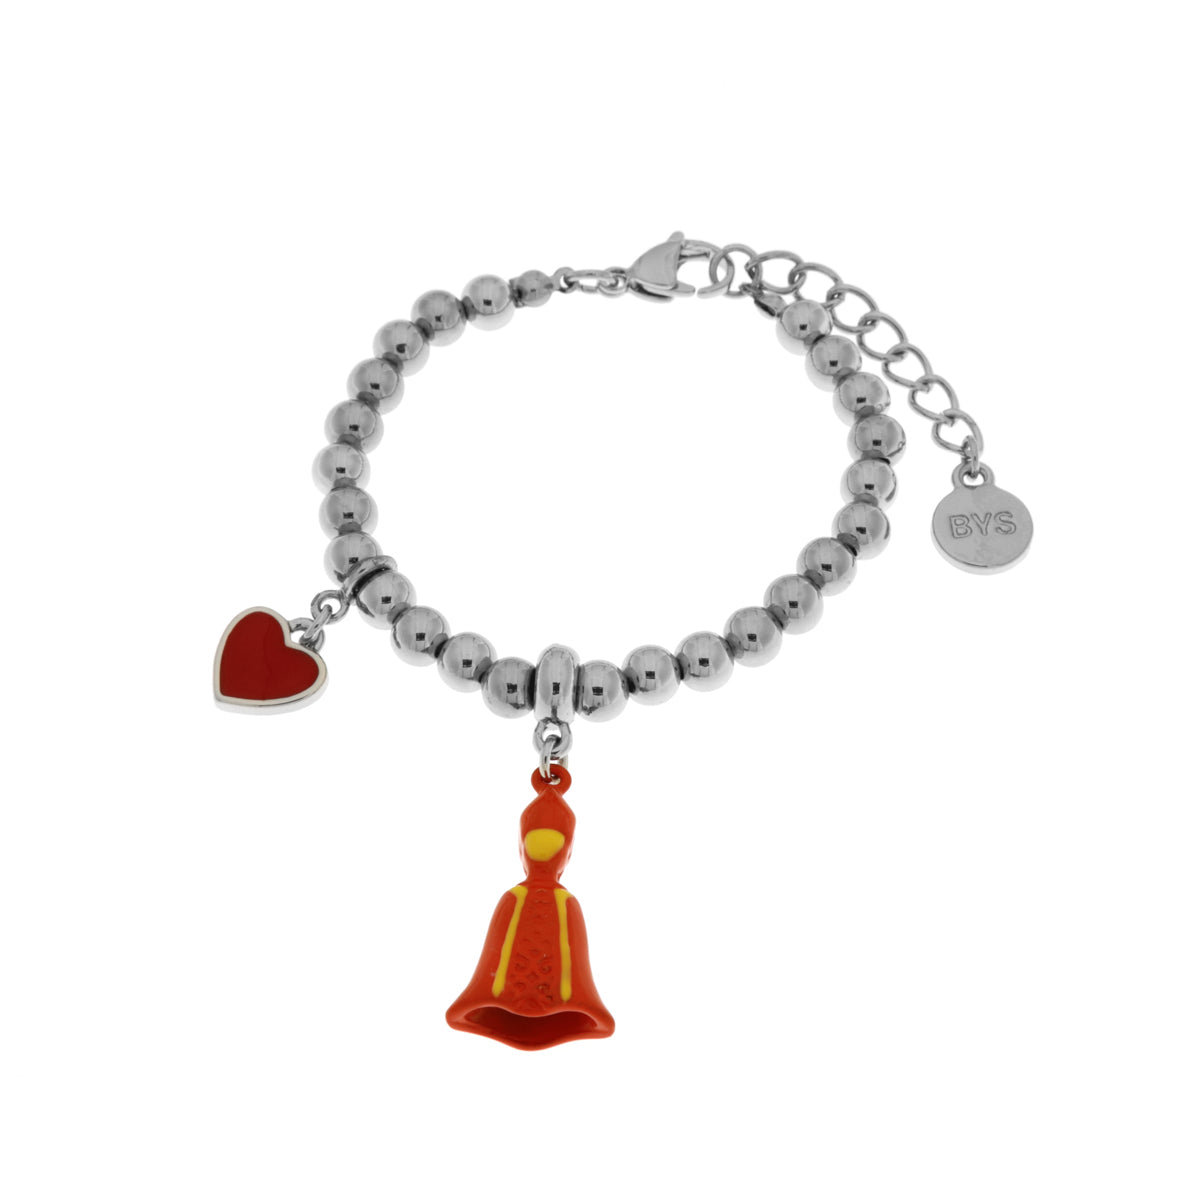 Metal bracelet with San Gennaro pendant and red heart